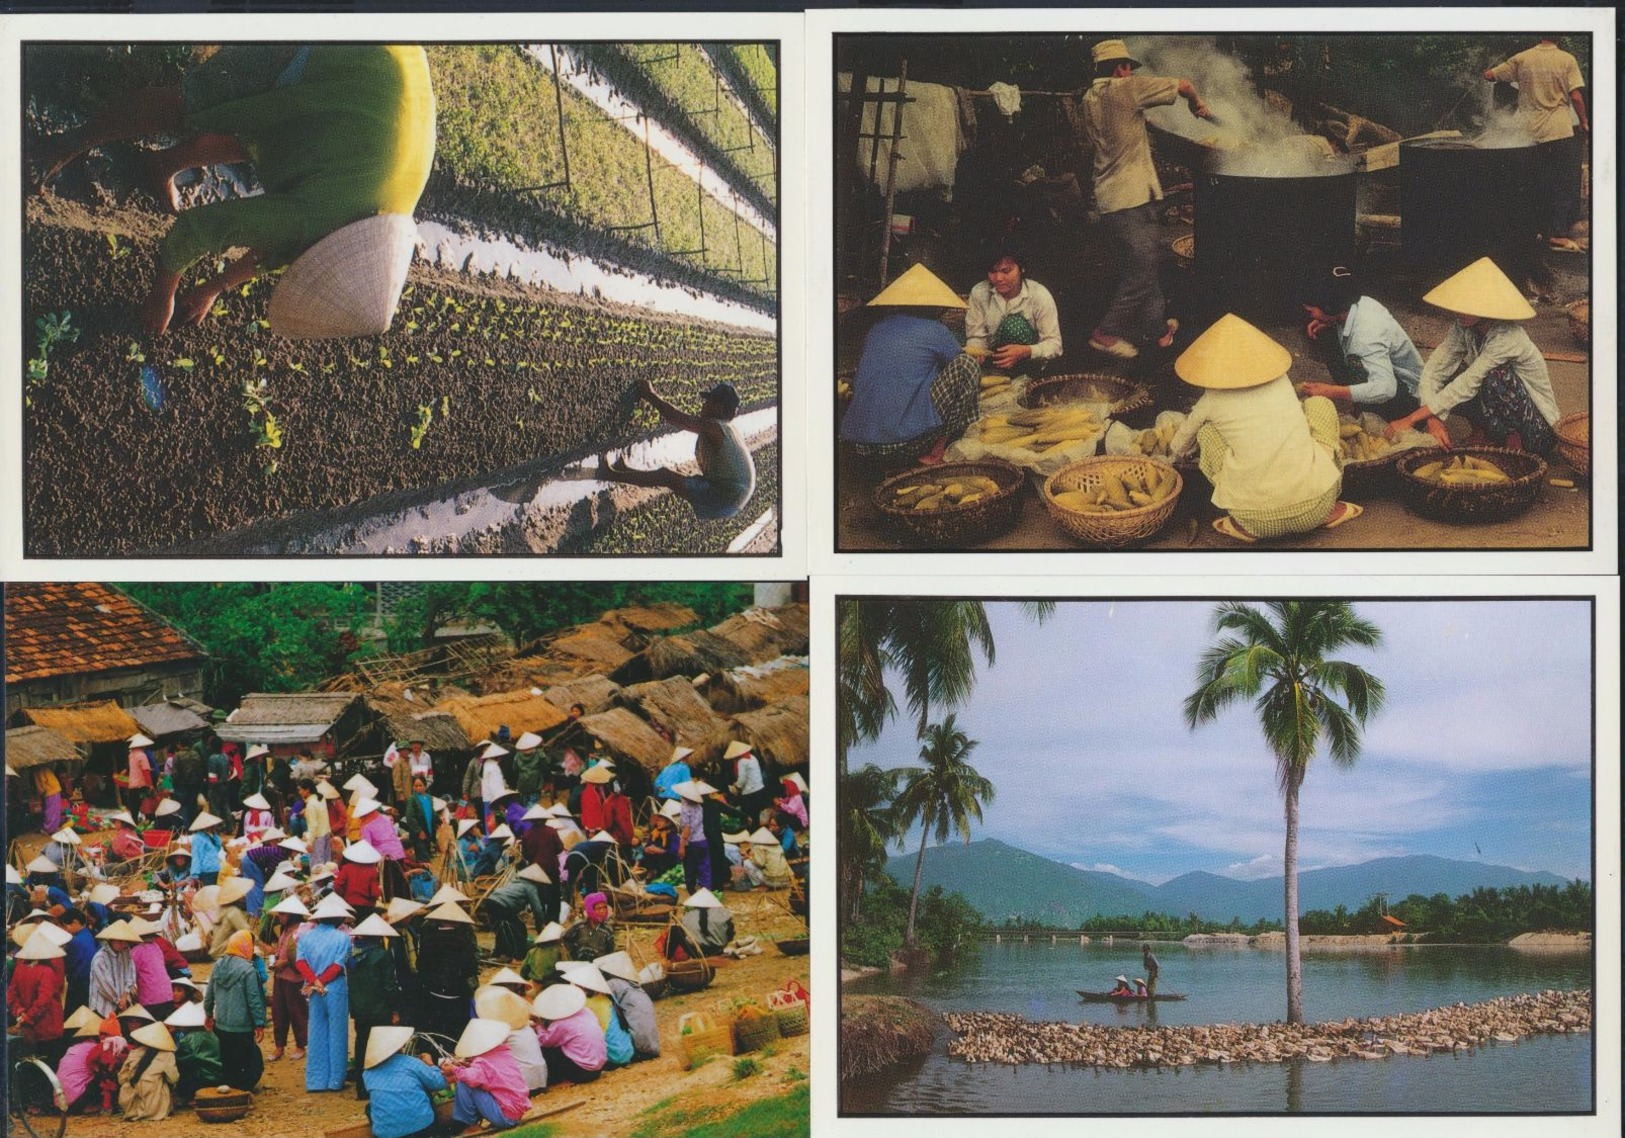 °°° CARNET 4 POSTCARDS - THAILAND - DAILY LIFE IN THE SUBURB OF NHA TRANG CITY °°° - Thailand